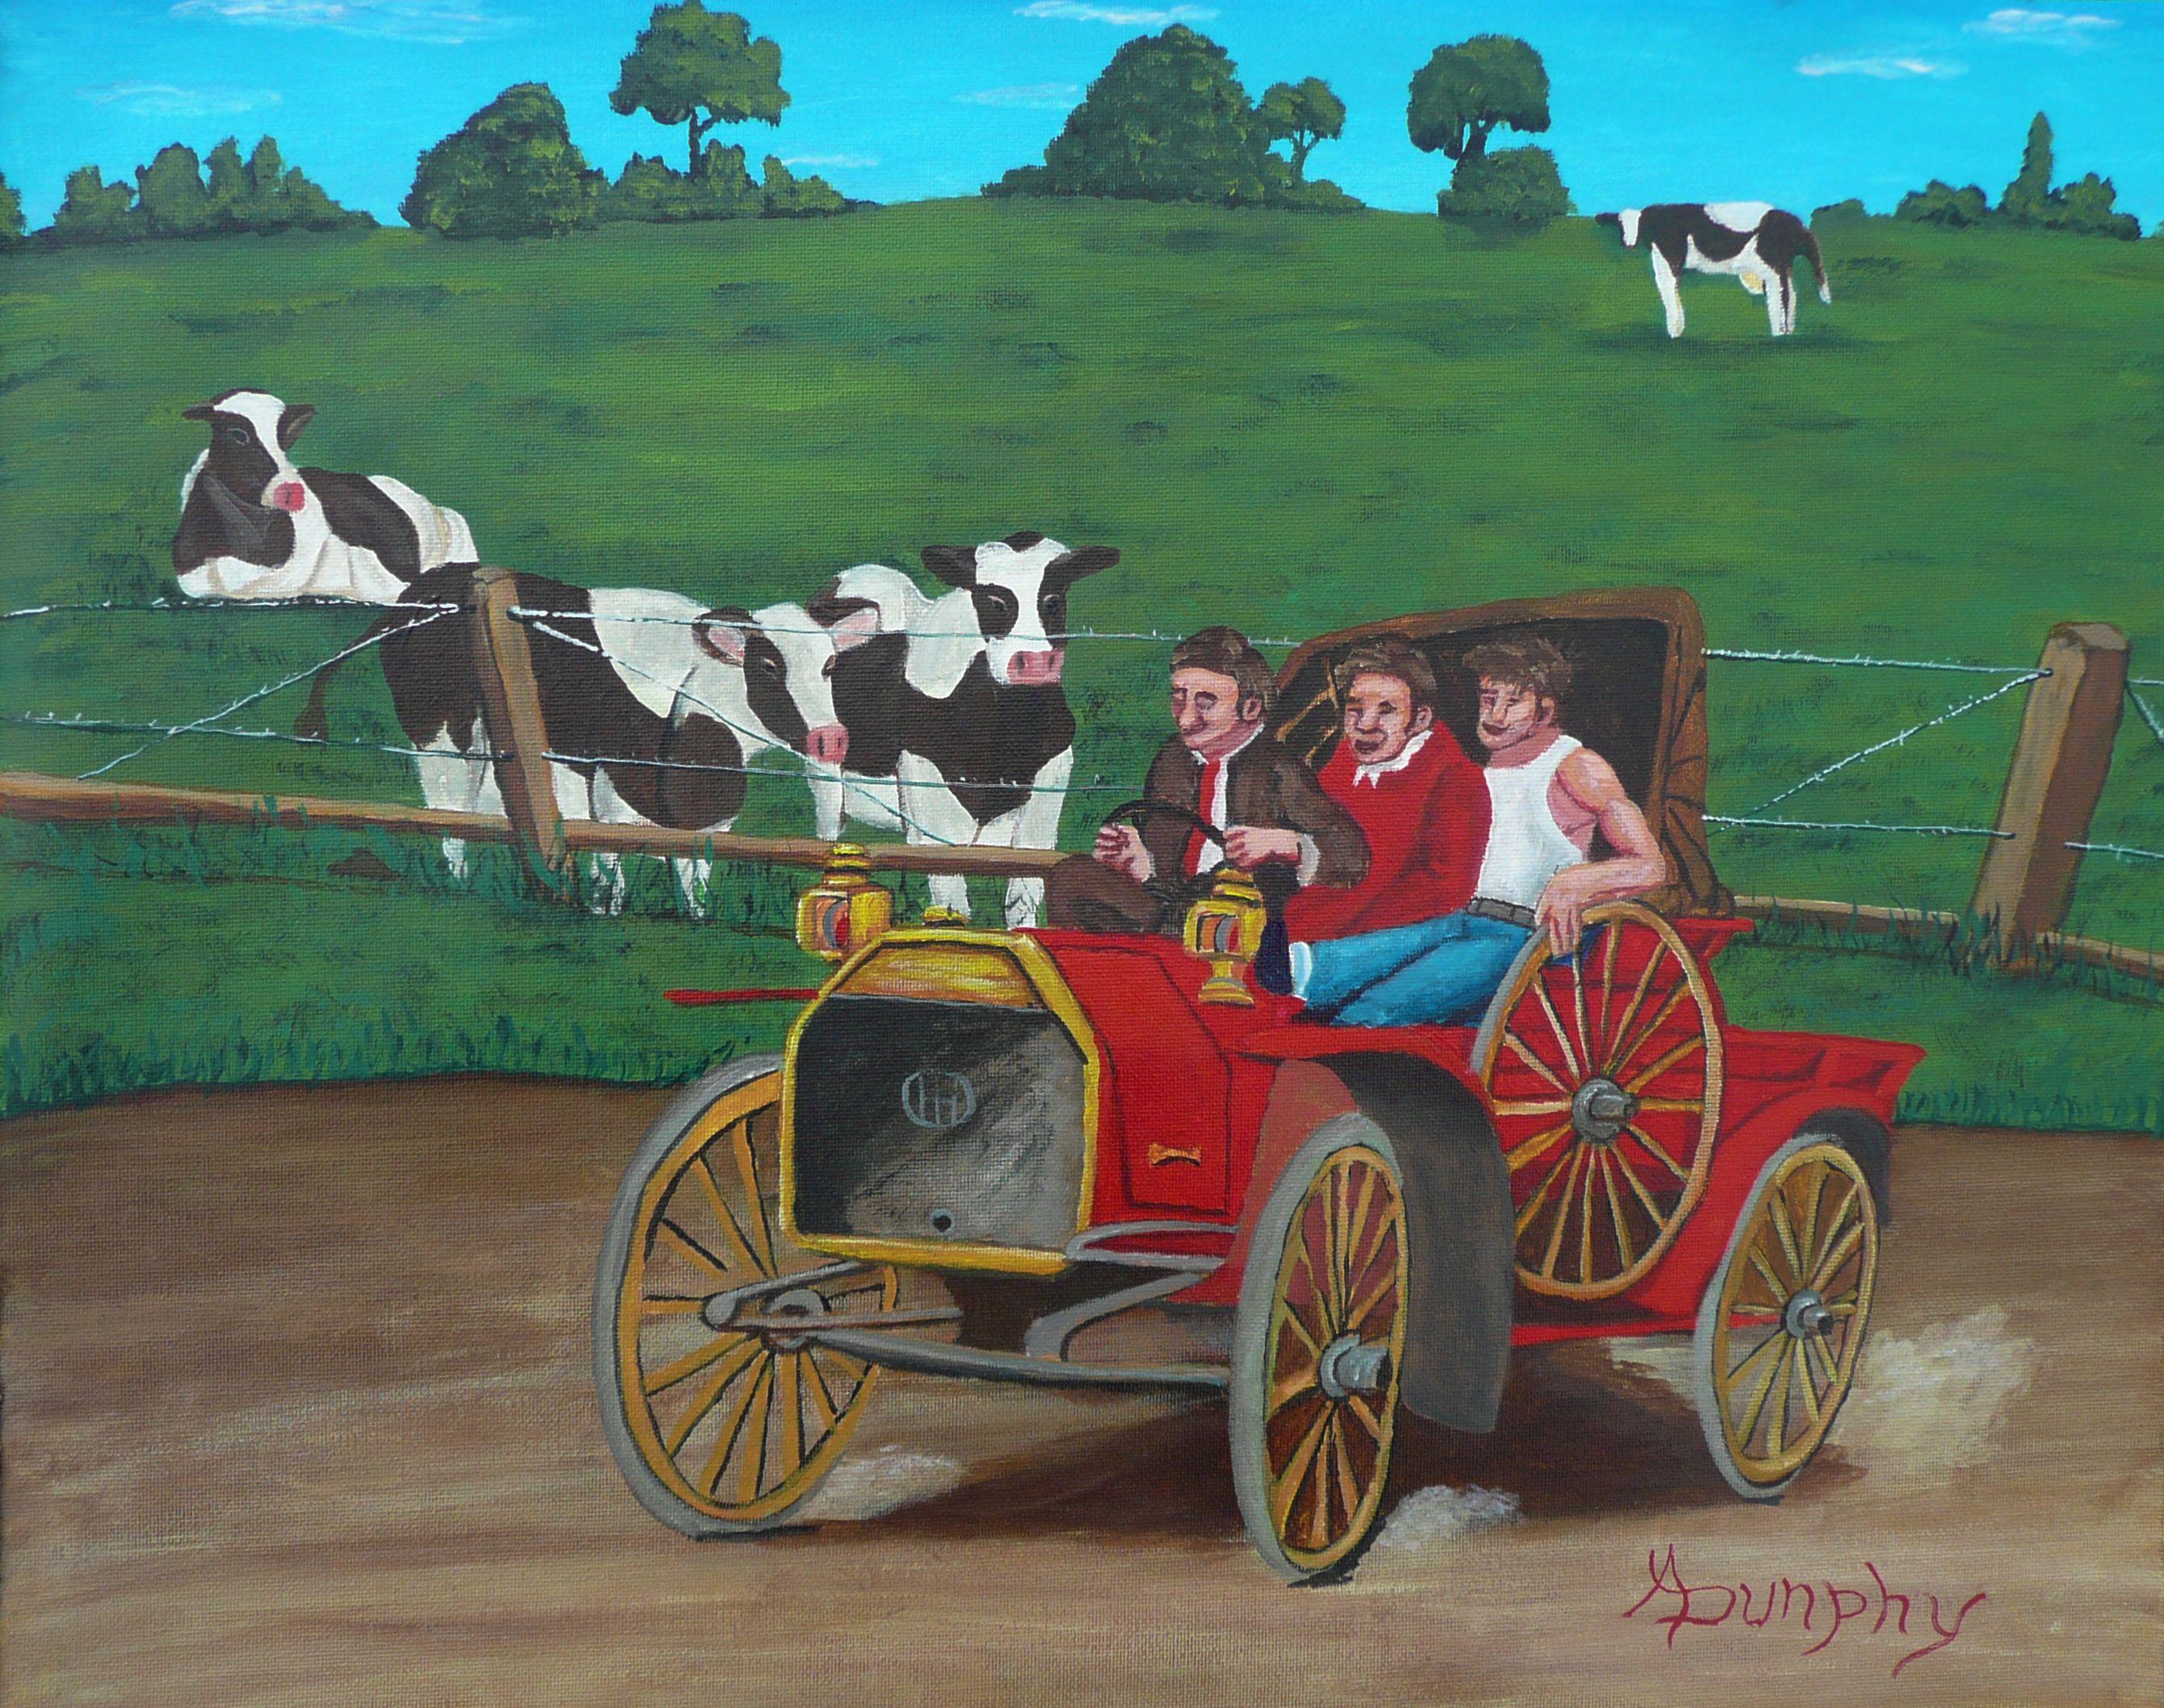 These boys think they are having a wild time as they zip along the country dirt road in 1910  doing a blistering 8 MPH but the cows do not appear to be so impressed. This painting has been created using only professional grade acrylics on a sheet of